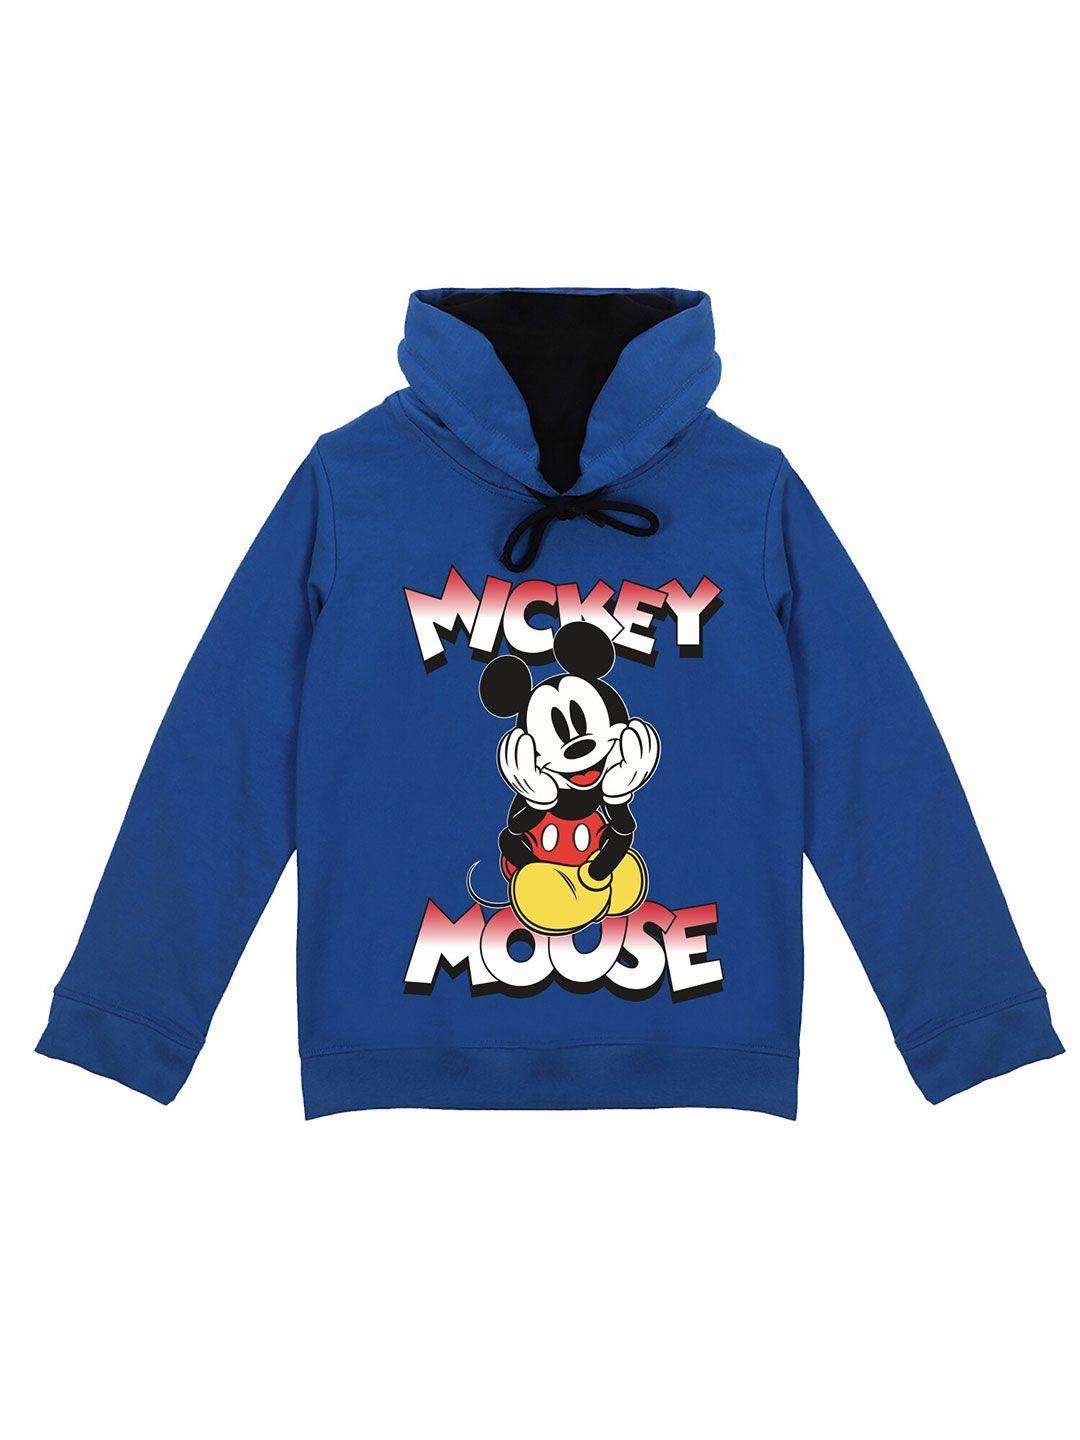 wear your mind boys mickey mouse graphic printed hooded cotton sweatshirt